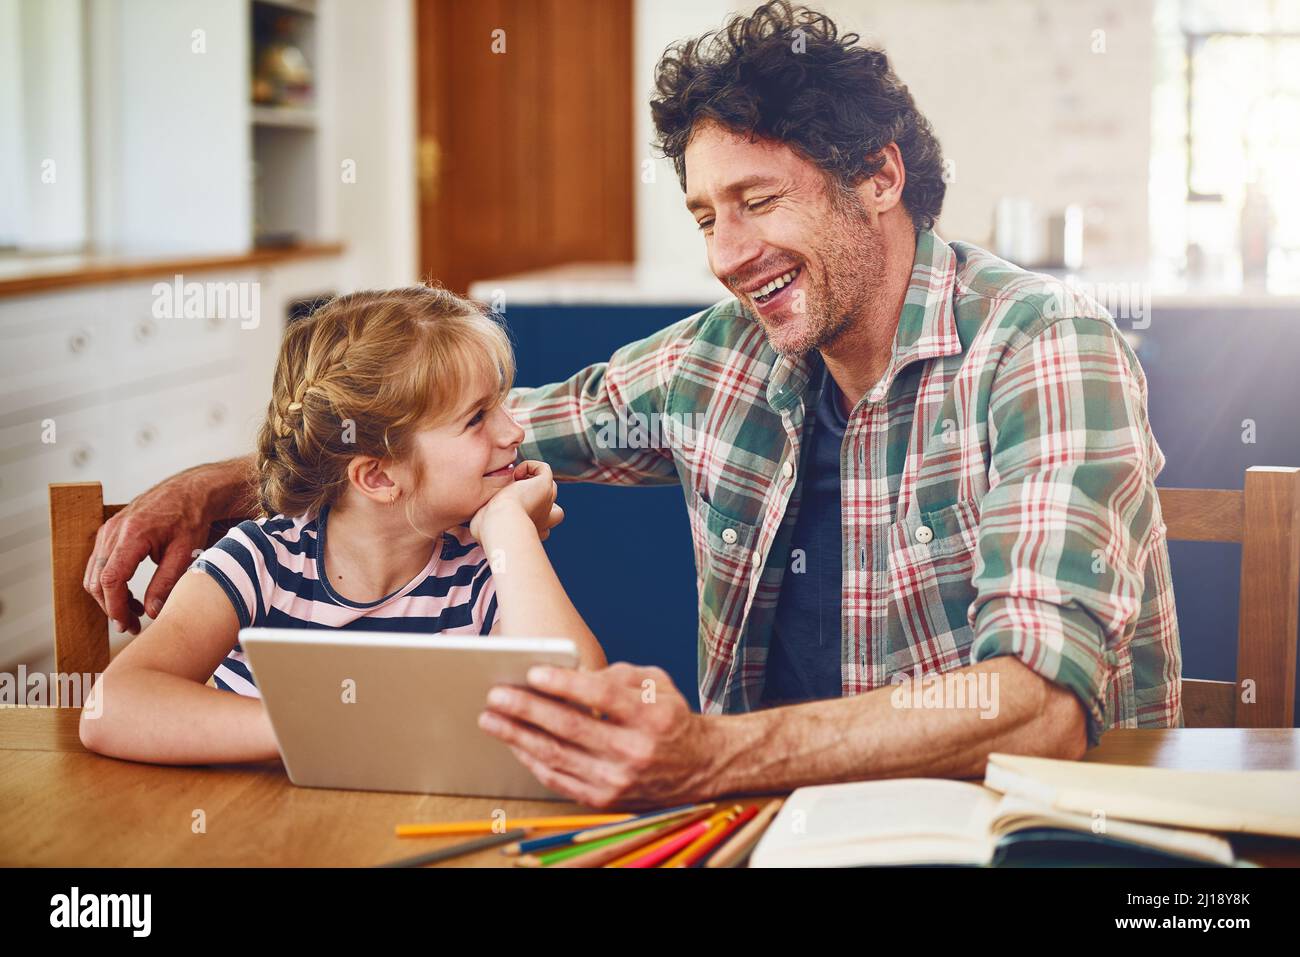 Youre really good at explaining stuff hey Dad. Cropped shot of a father helping his daughter complete her homework on a digital tablet. Stock Photo